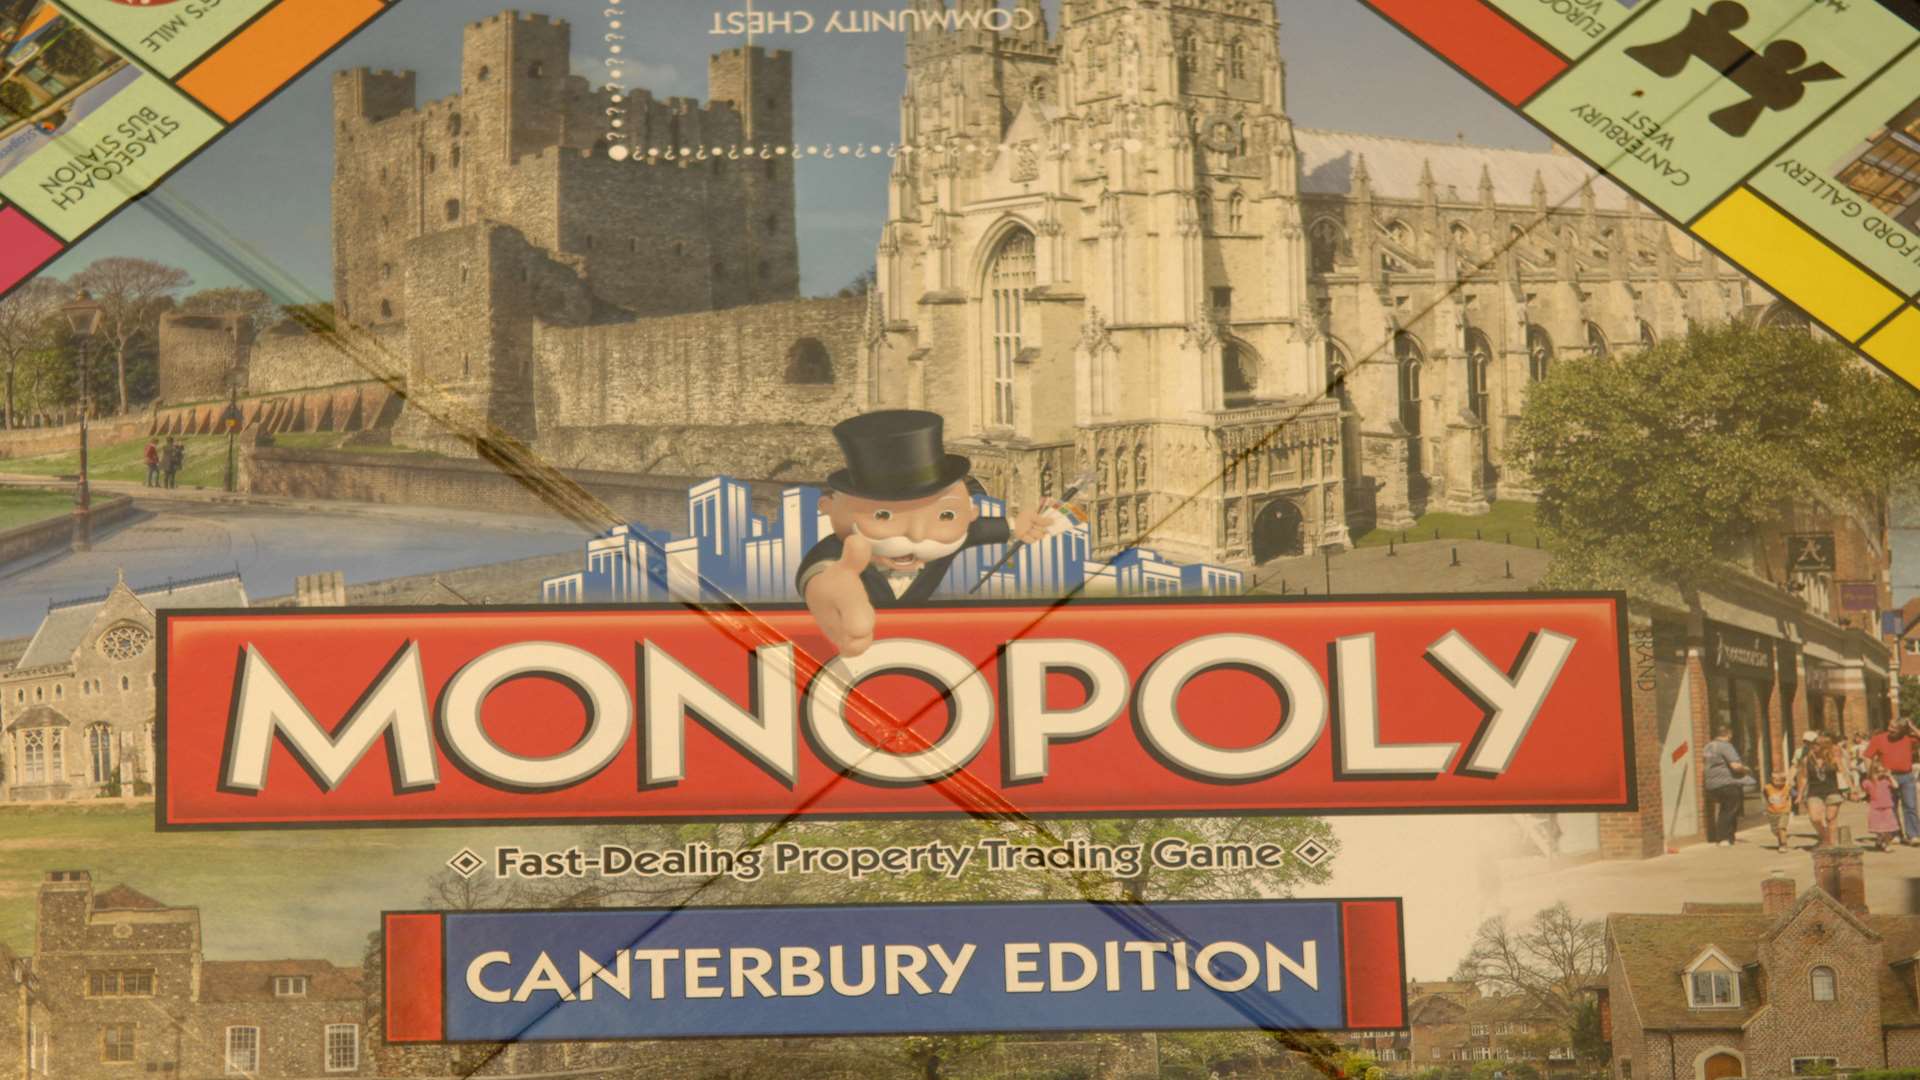 The original Canterbury edition of Monopoly, which shows Rochester Castle on the board